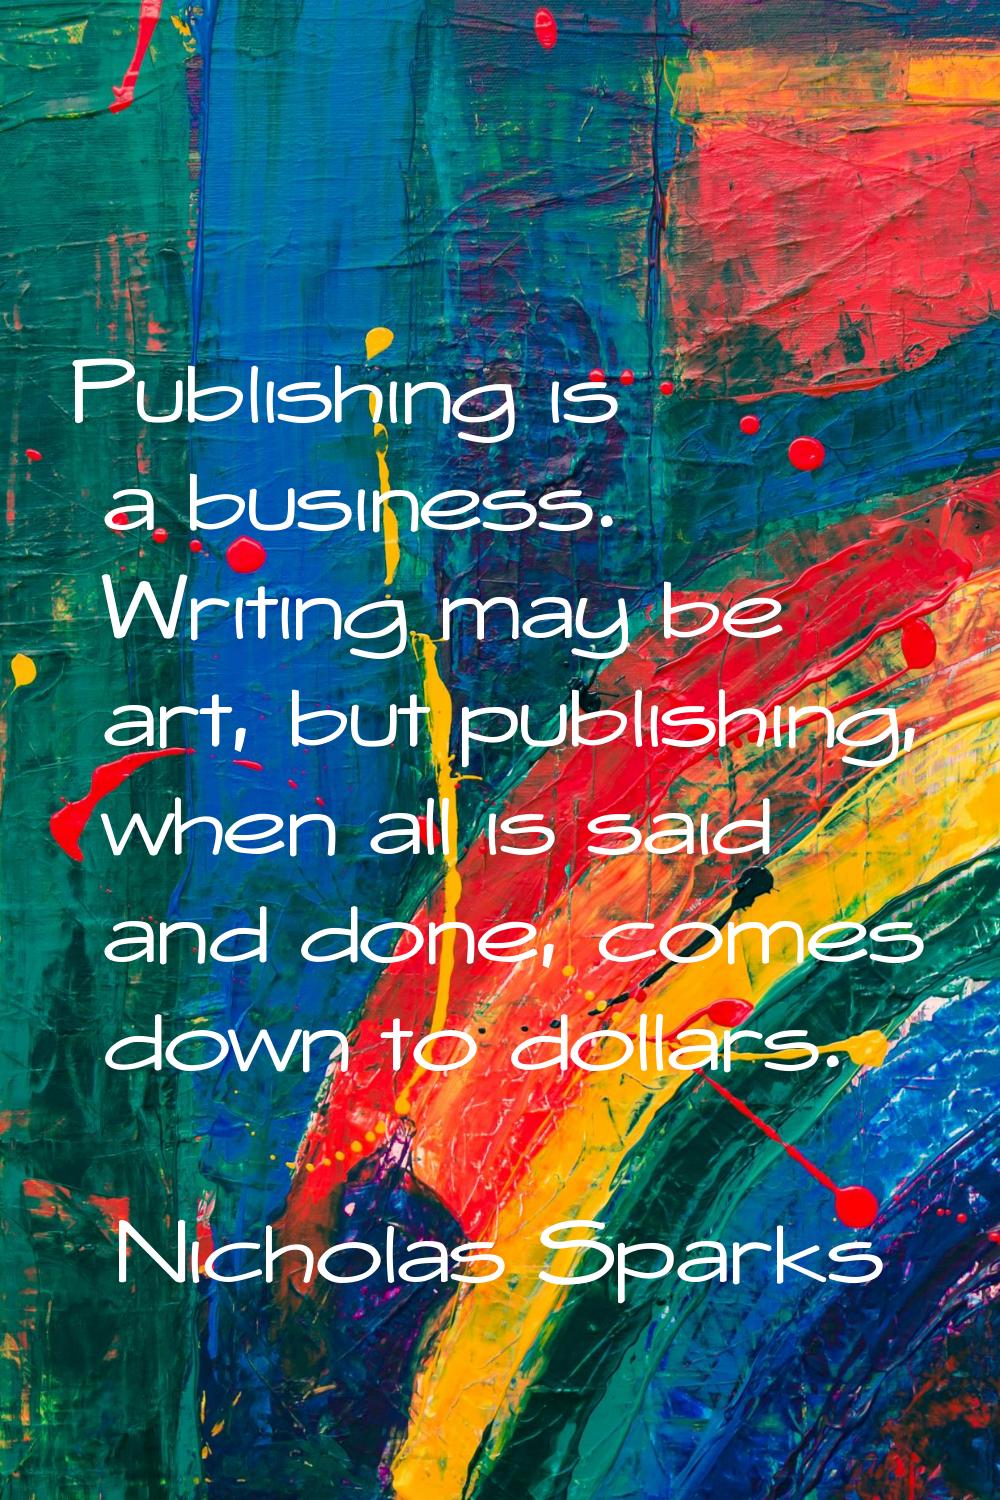 Publishing is a business. Writing may be art, but publishing, when all is said and done, comes down